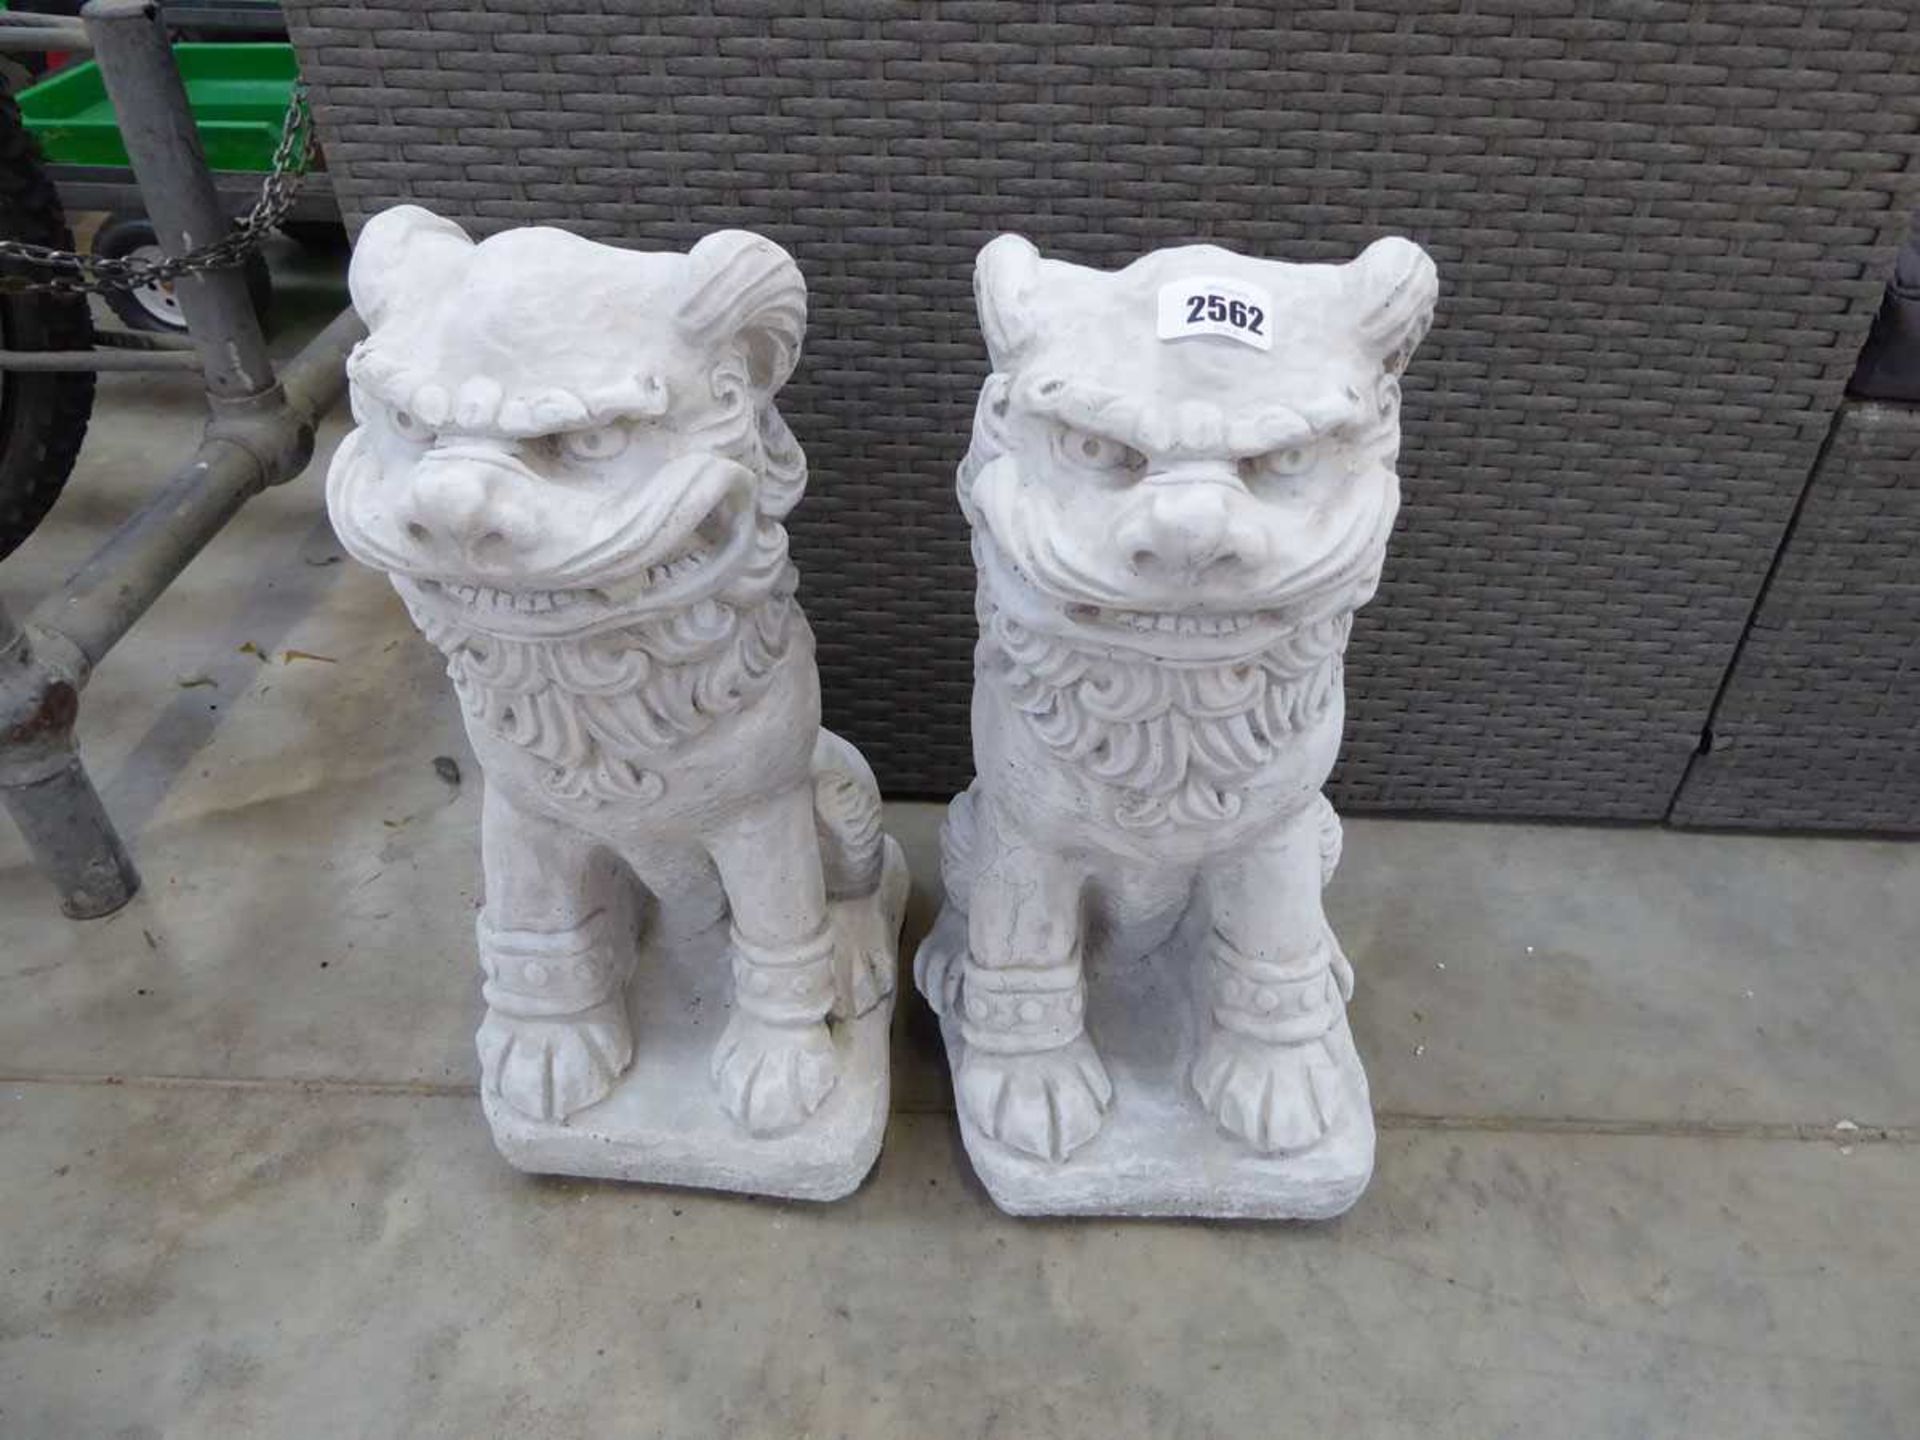 Pair of concrete Chinese guardian lions